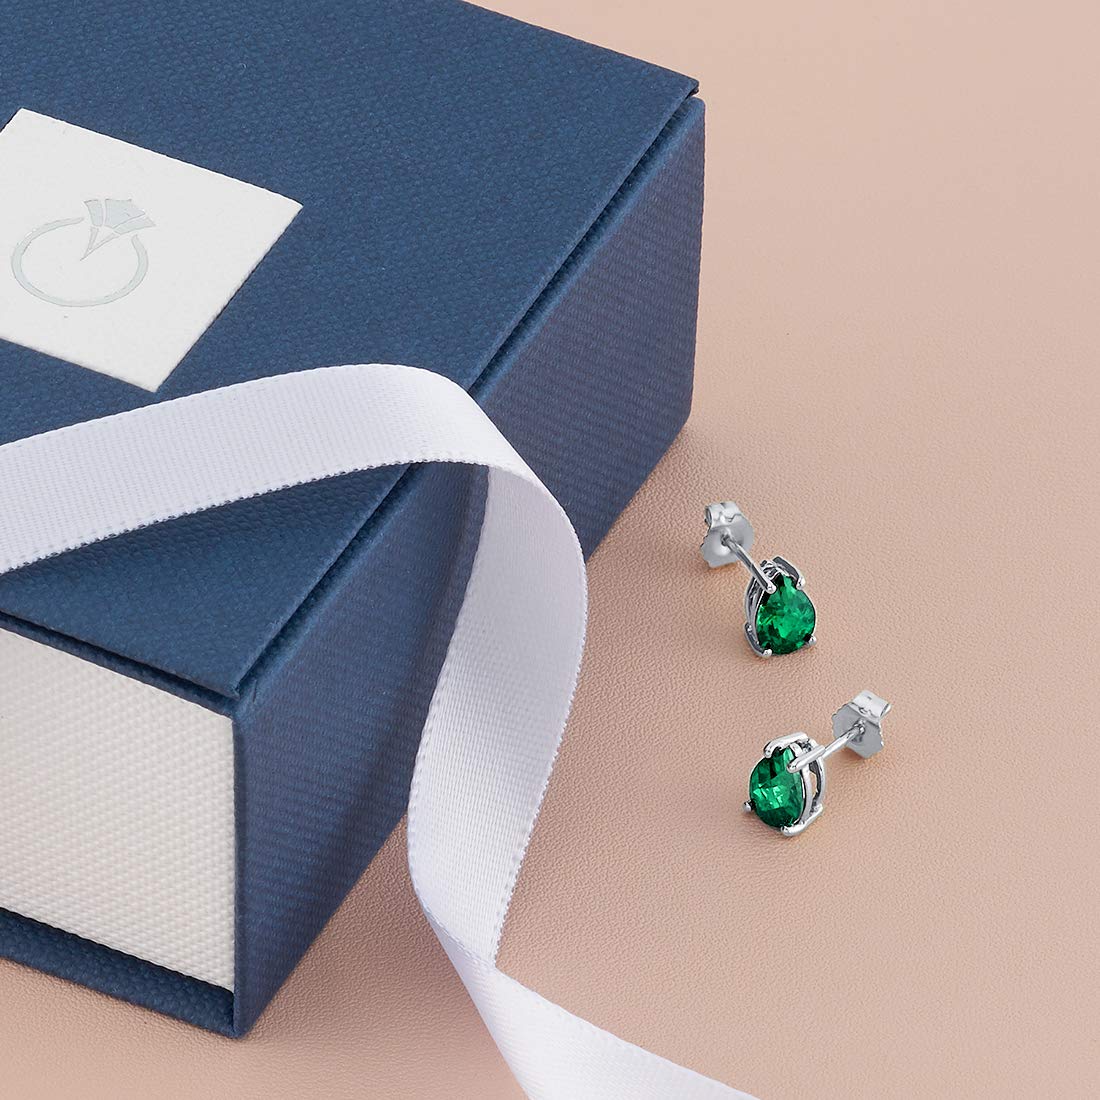 Peora Solid 14K White Gold Created Emerald Earrings for Women, Classic Solitaire Studs, 7x5mm Pear Shape, 1.25 Carats total, Friction Back